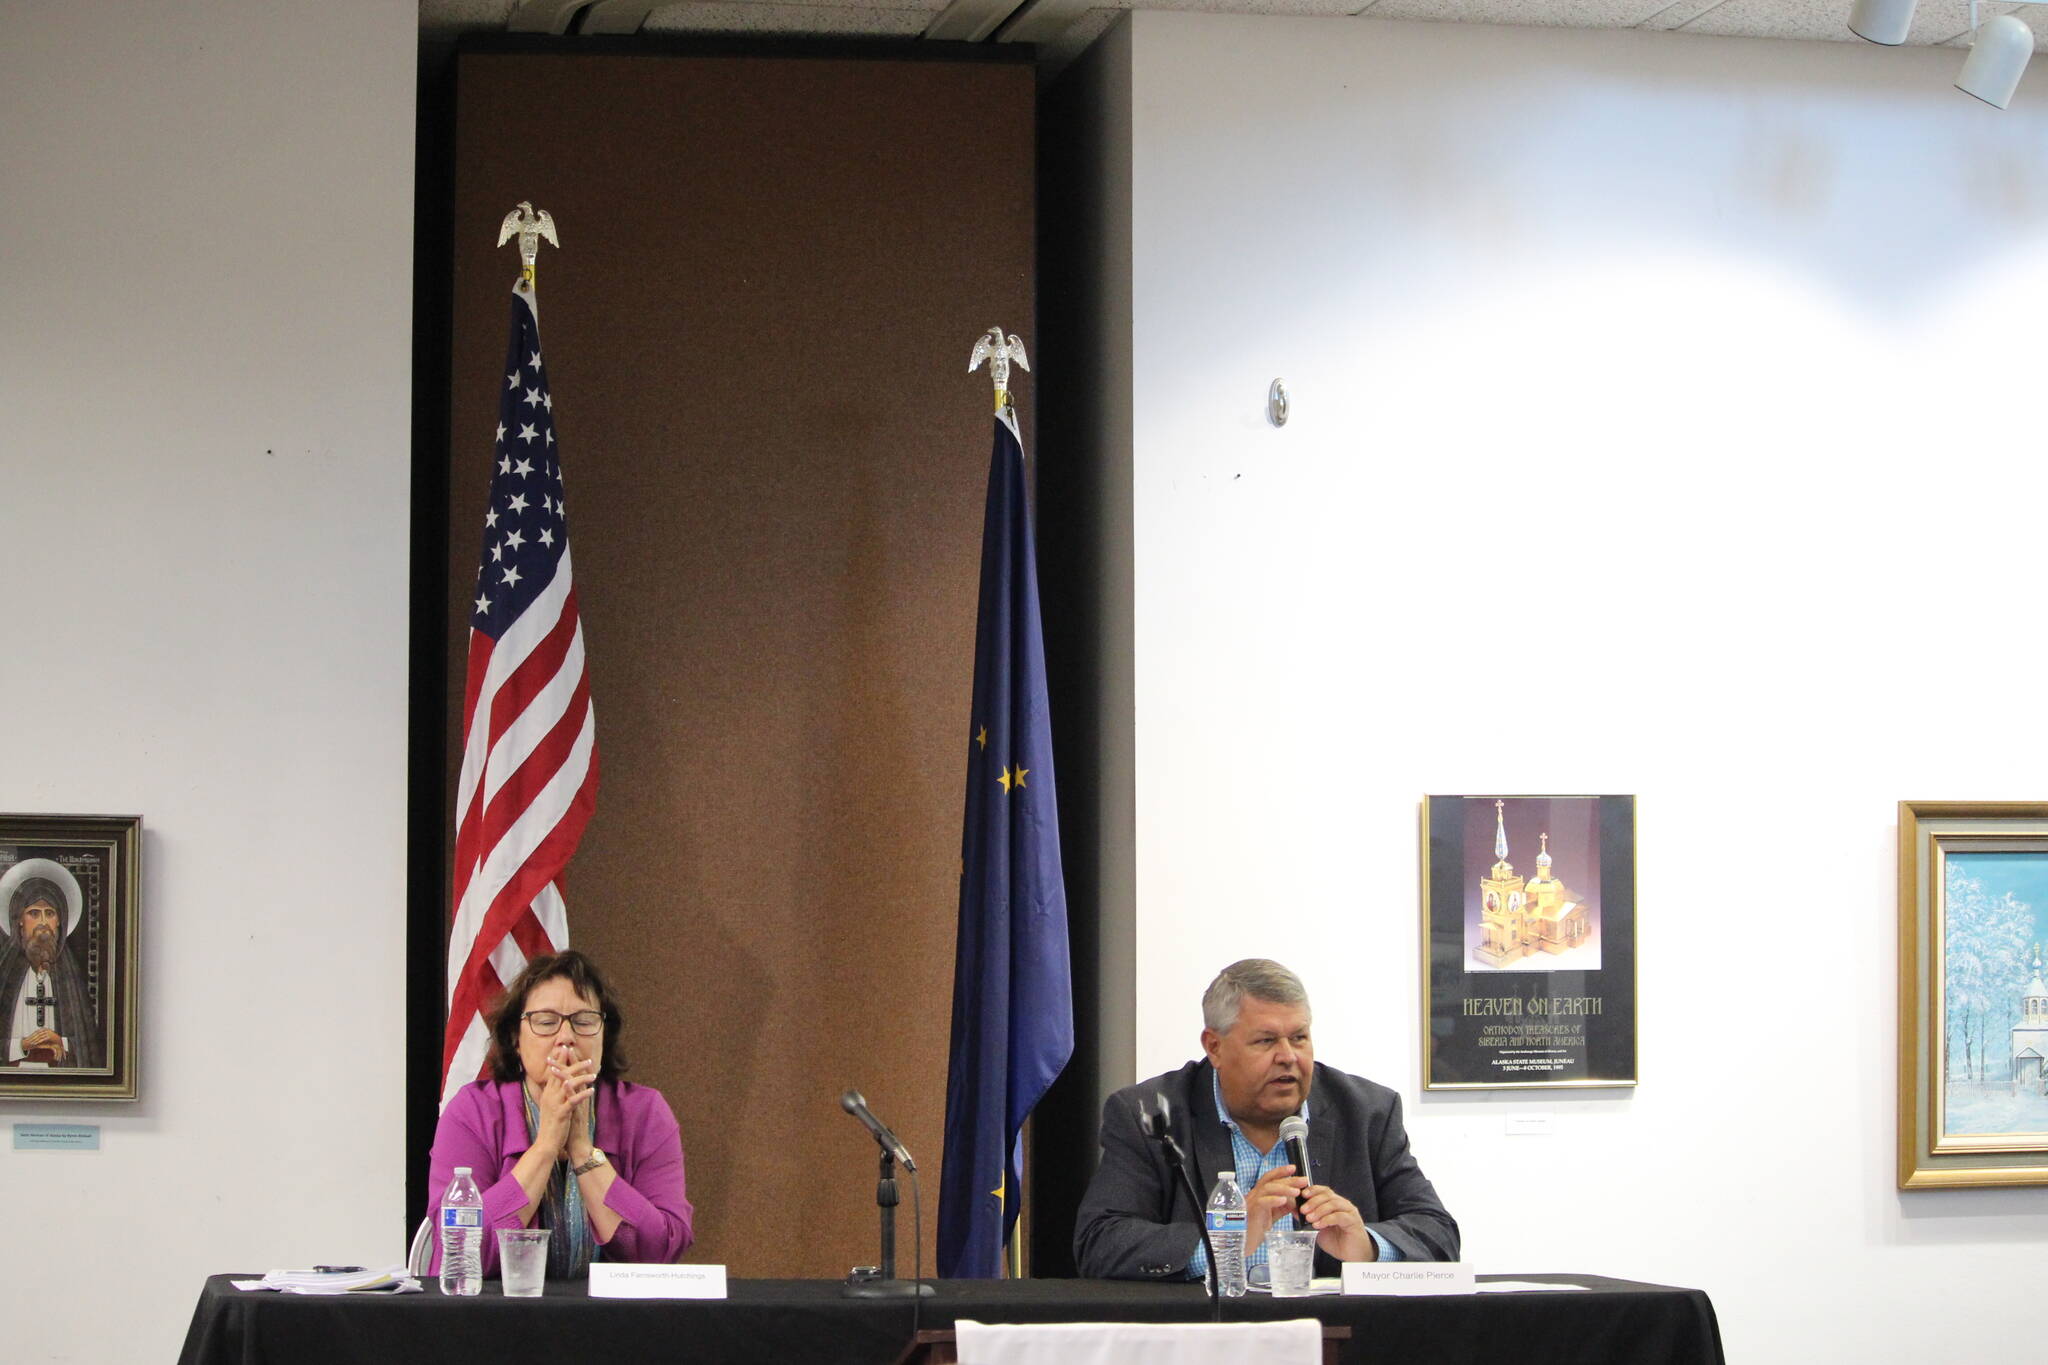 Linda Farnsworth Hutchings, left, and Kenai Peninsula Borough Mayor Charlie Pierce participate in a mayoral candidate forum hosted by the Kenai Chamber of Commerce at the Kenai Visitor and Cultural Center on Sept. 9, 2020. (Peninsula Clarion file)